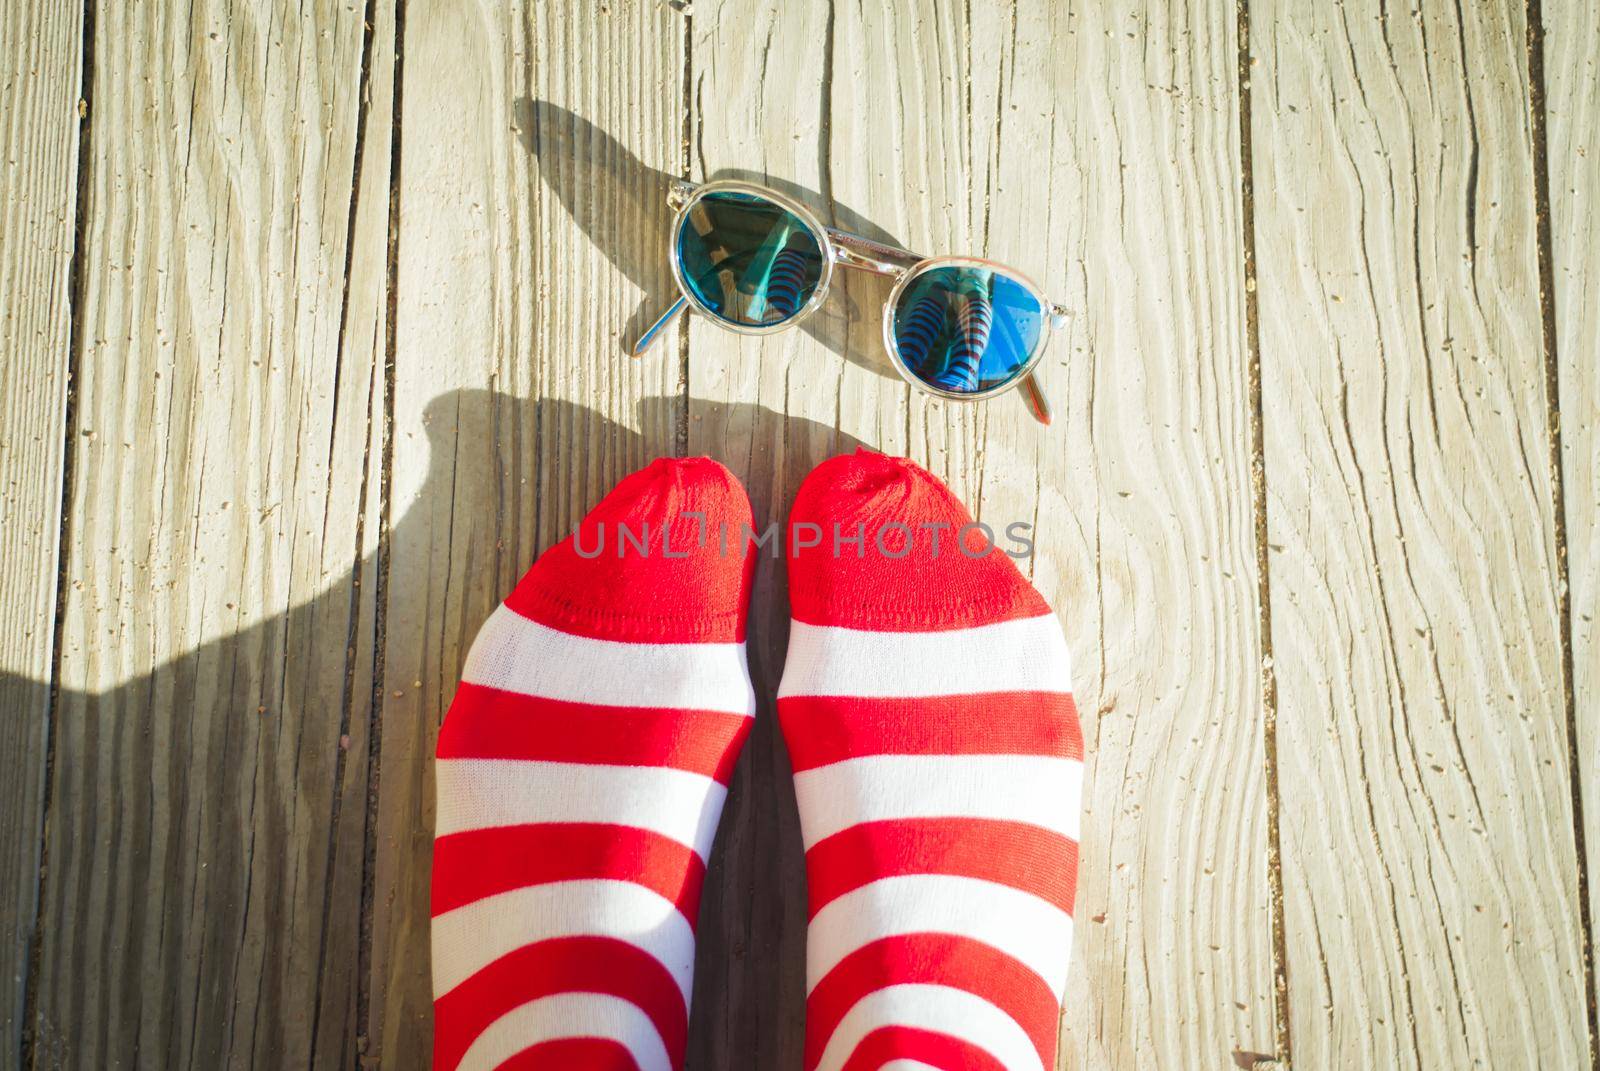 Concept of summer vacation with red striped socks and sunglesses on sea pier